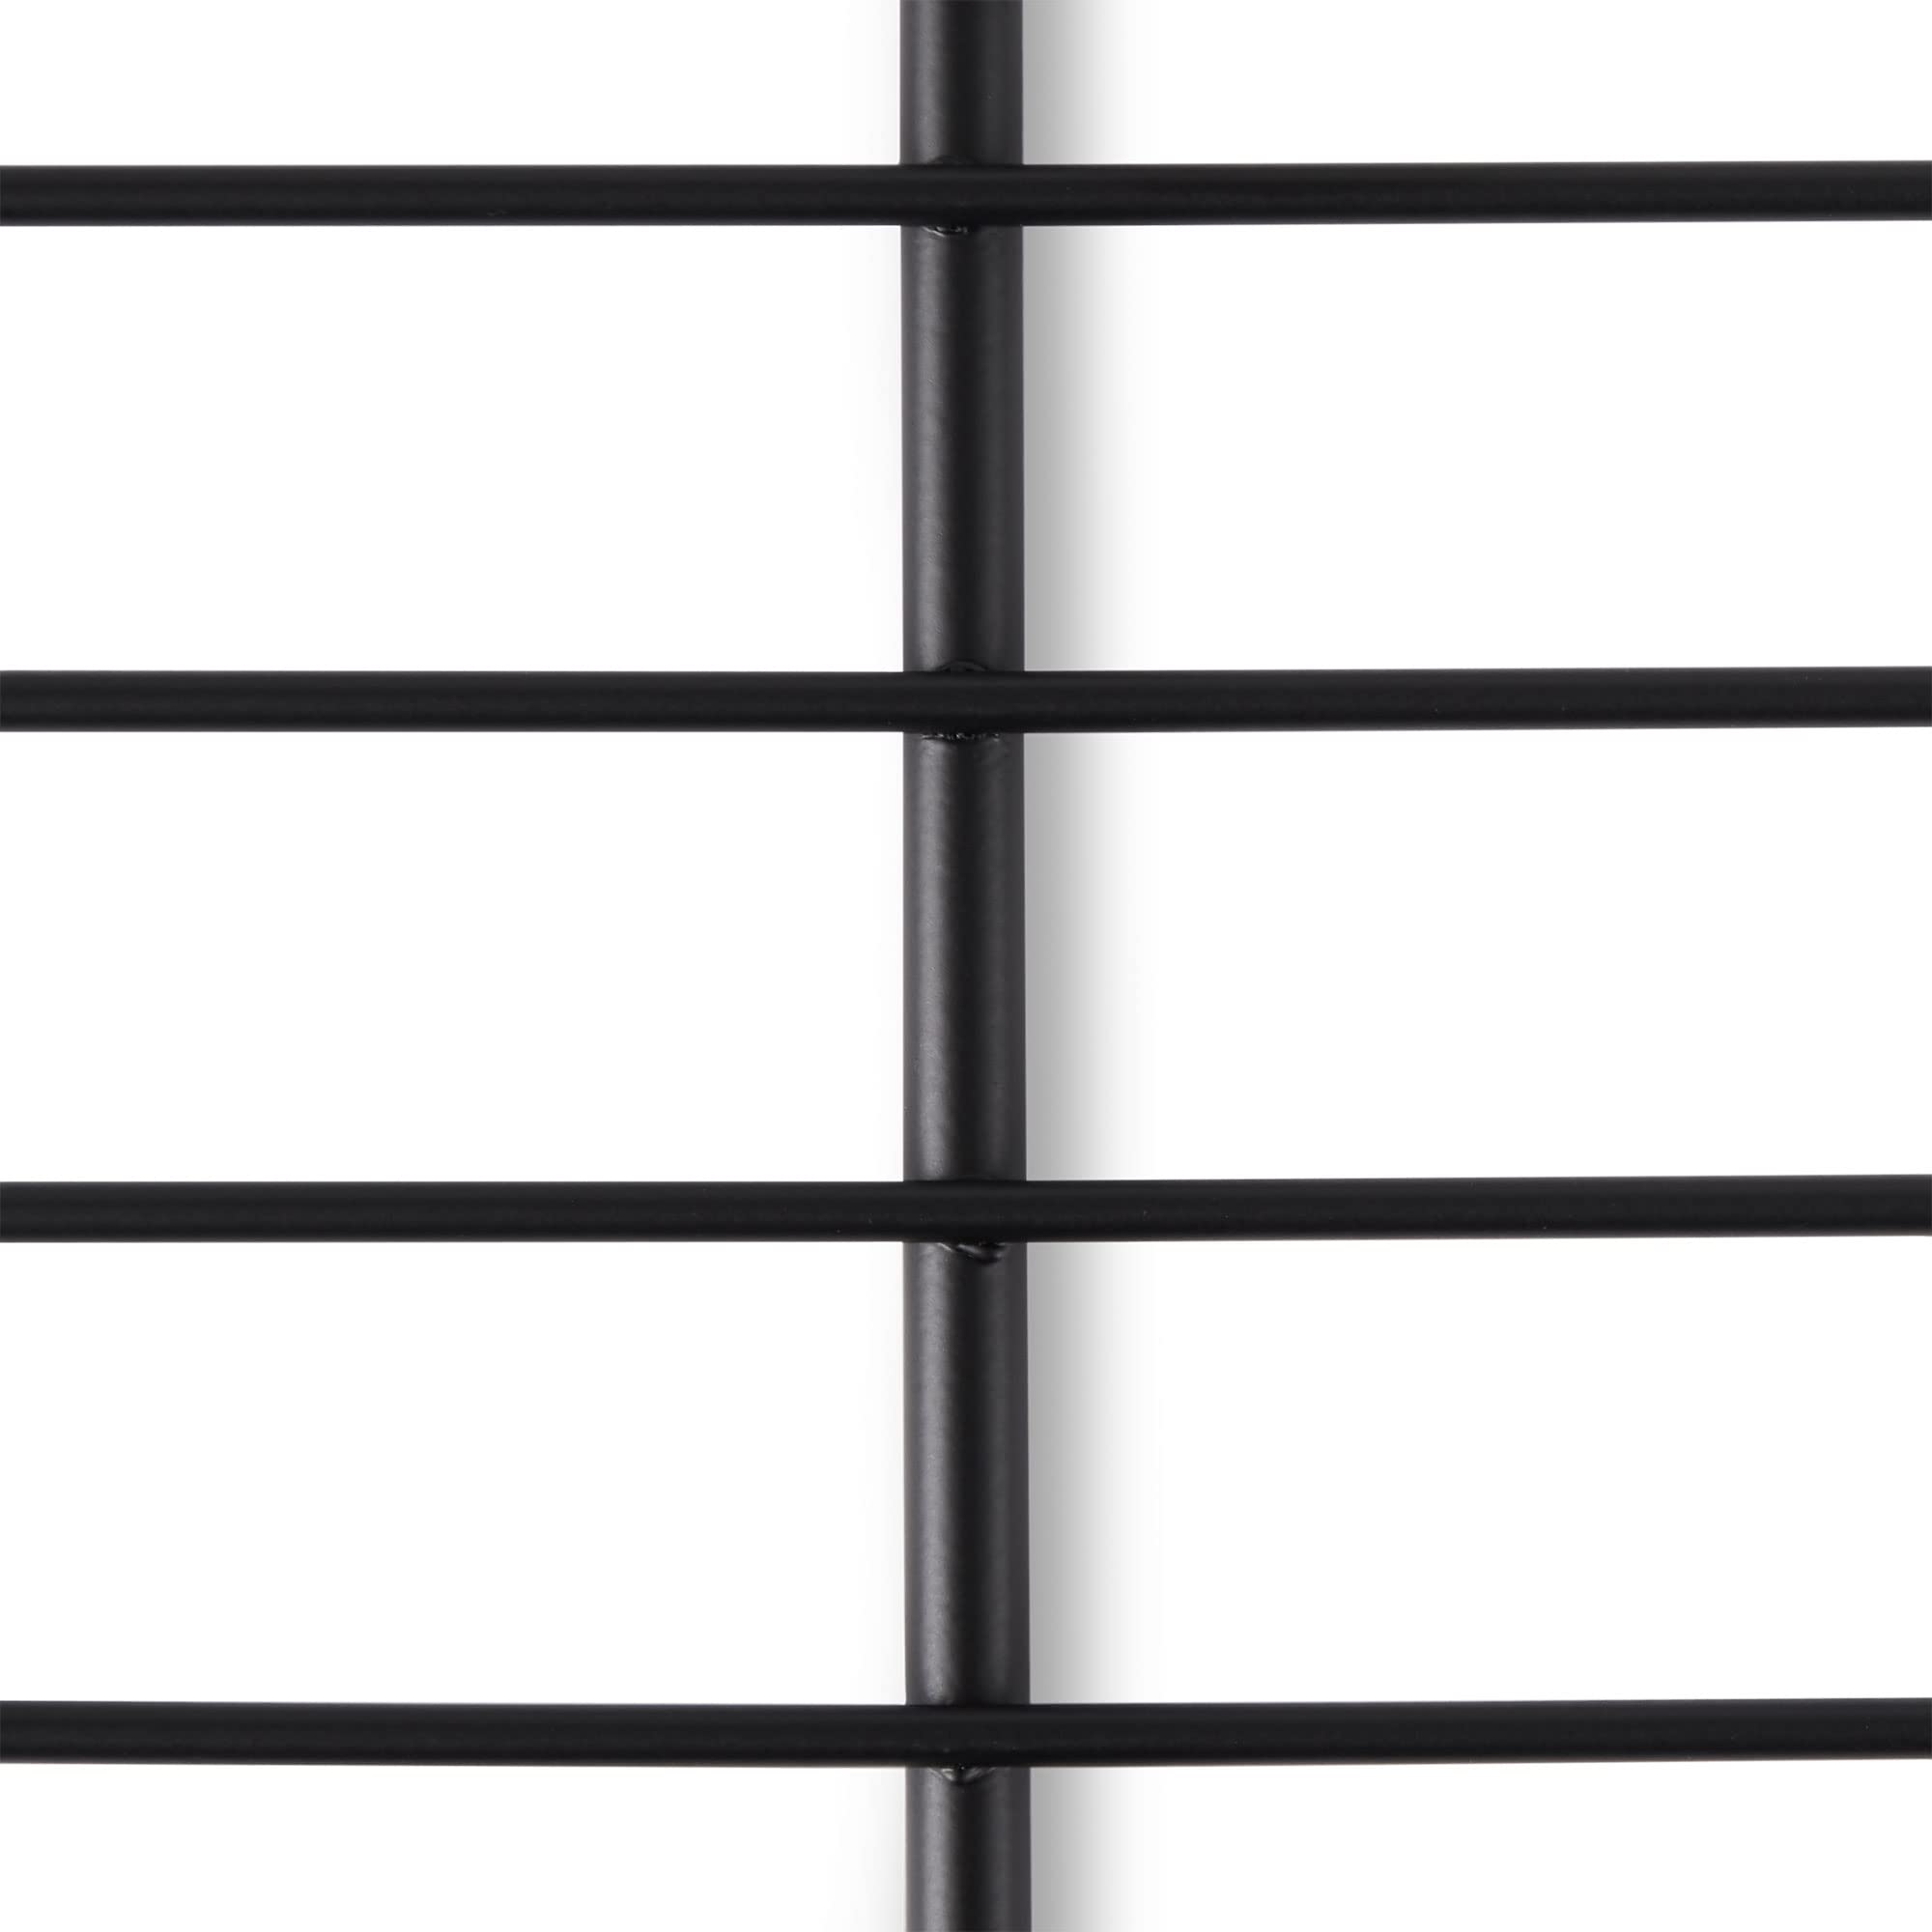 Suncast BMSA7S Vertical Storage Organization Metal Wire Shelf Rack Shelving for Shed with Installation Hardware Included, Black, 4 Pack